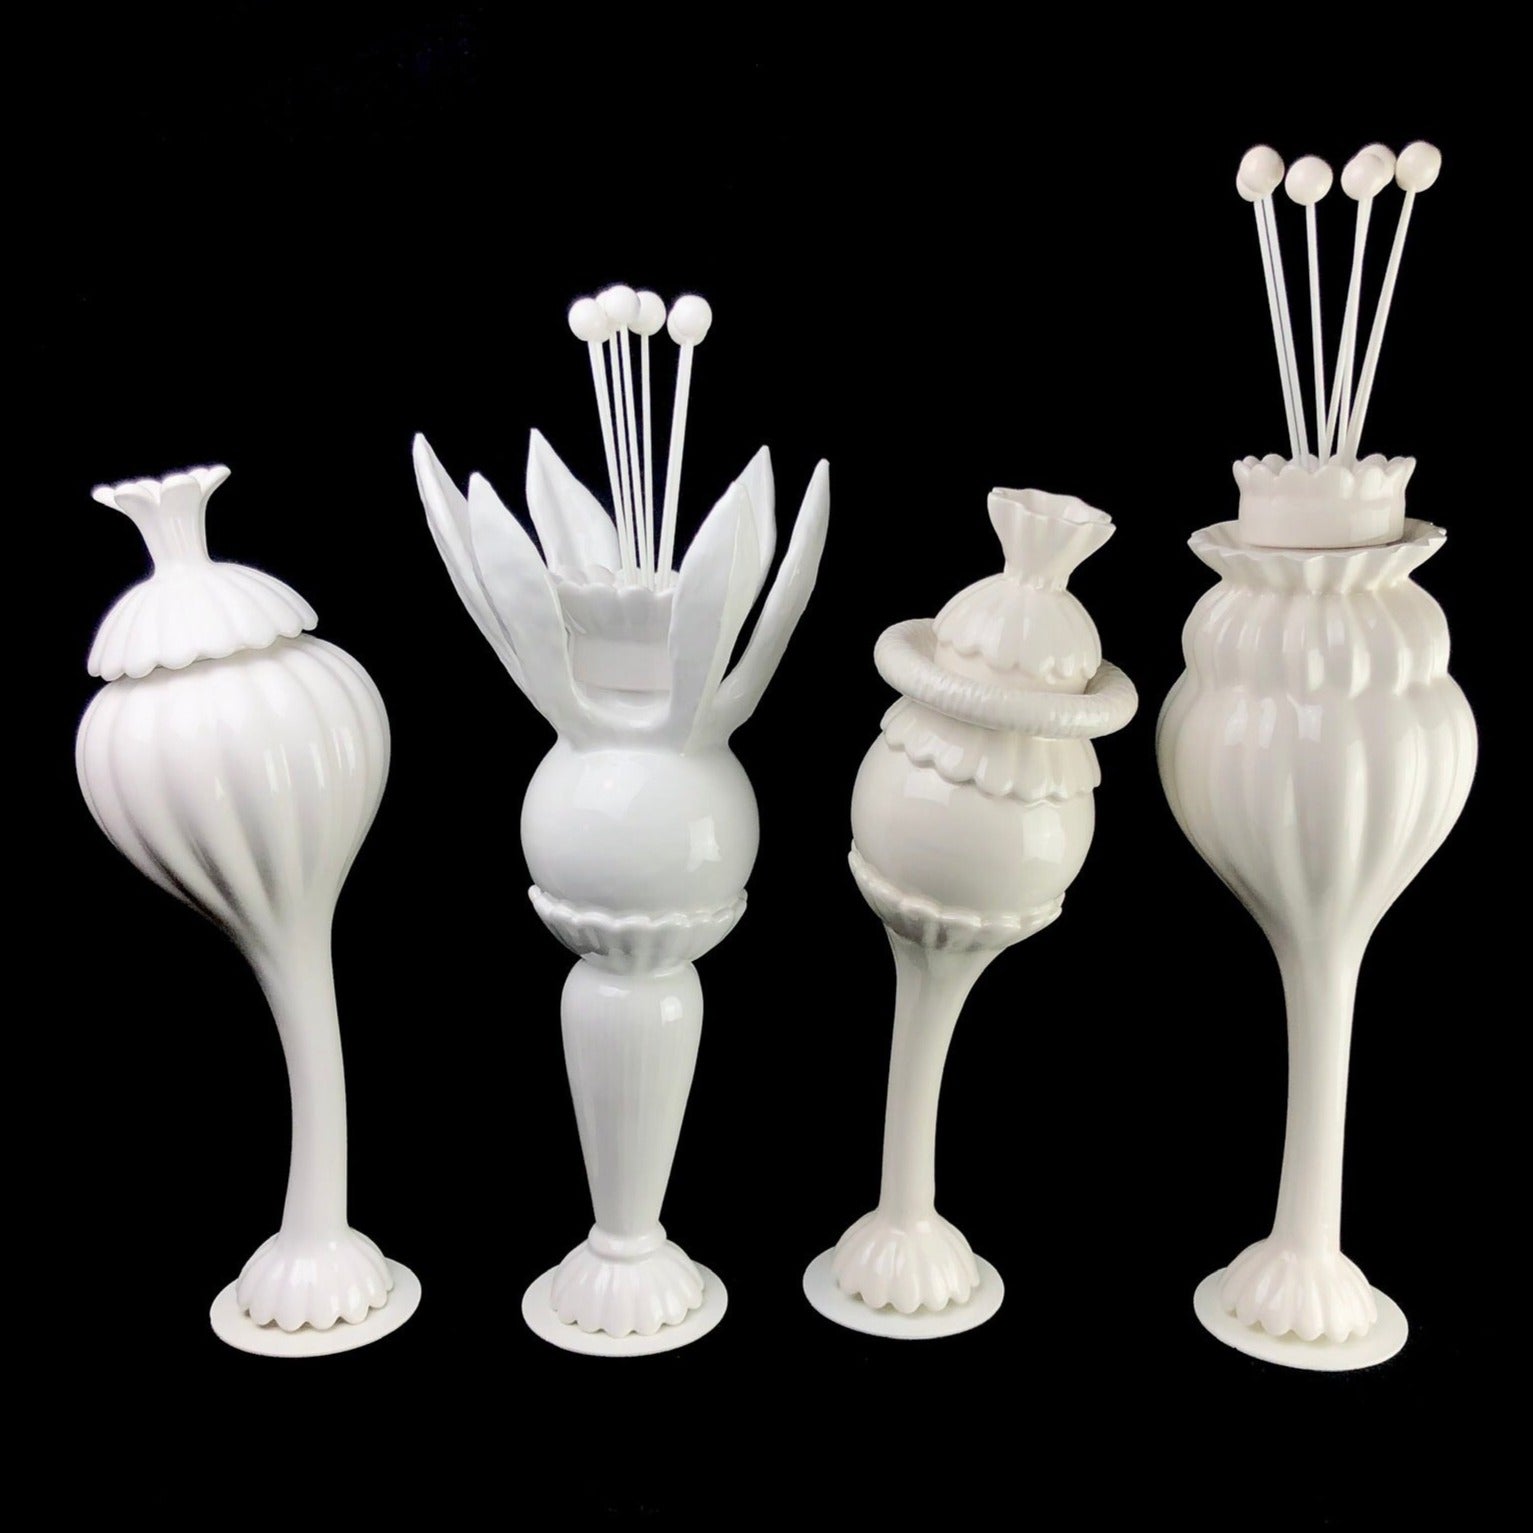 Four different designs of Ceramic Flower Oil Diffuser available for purchase